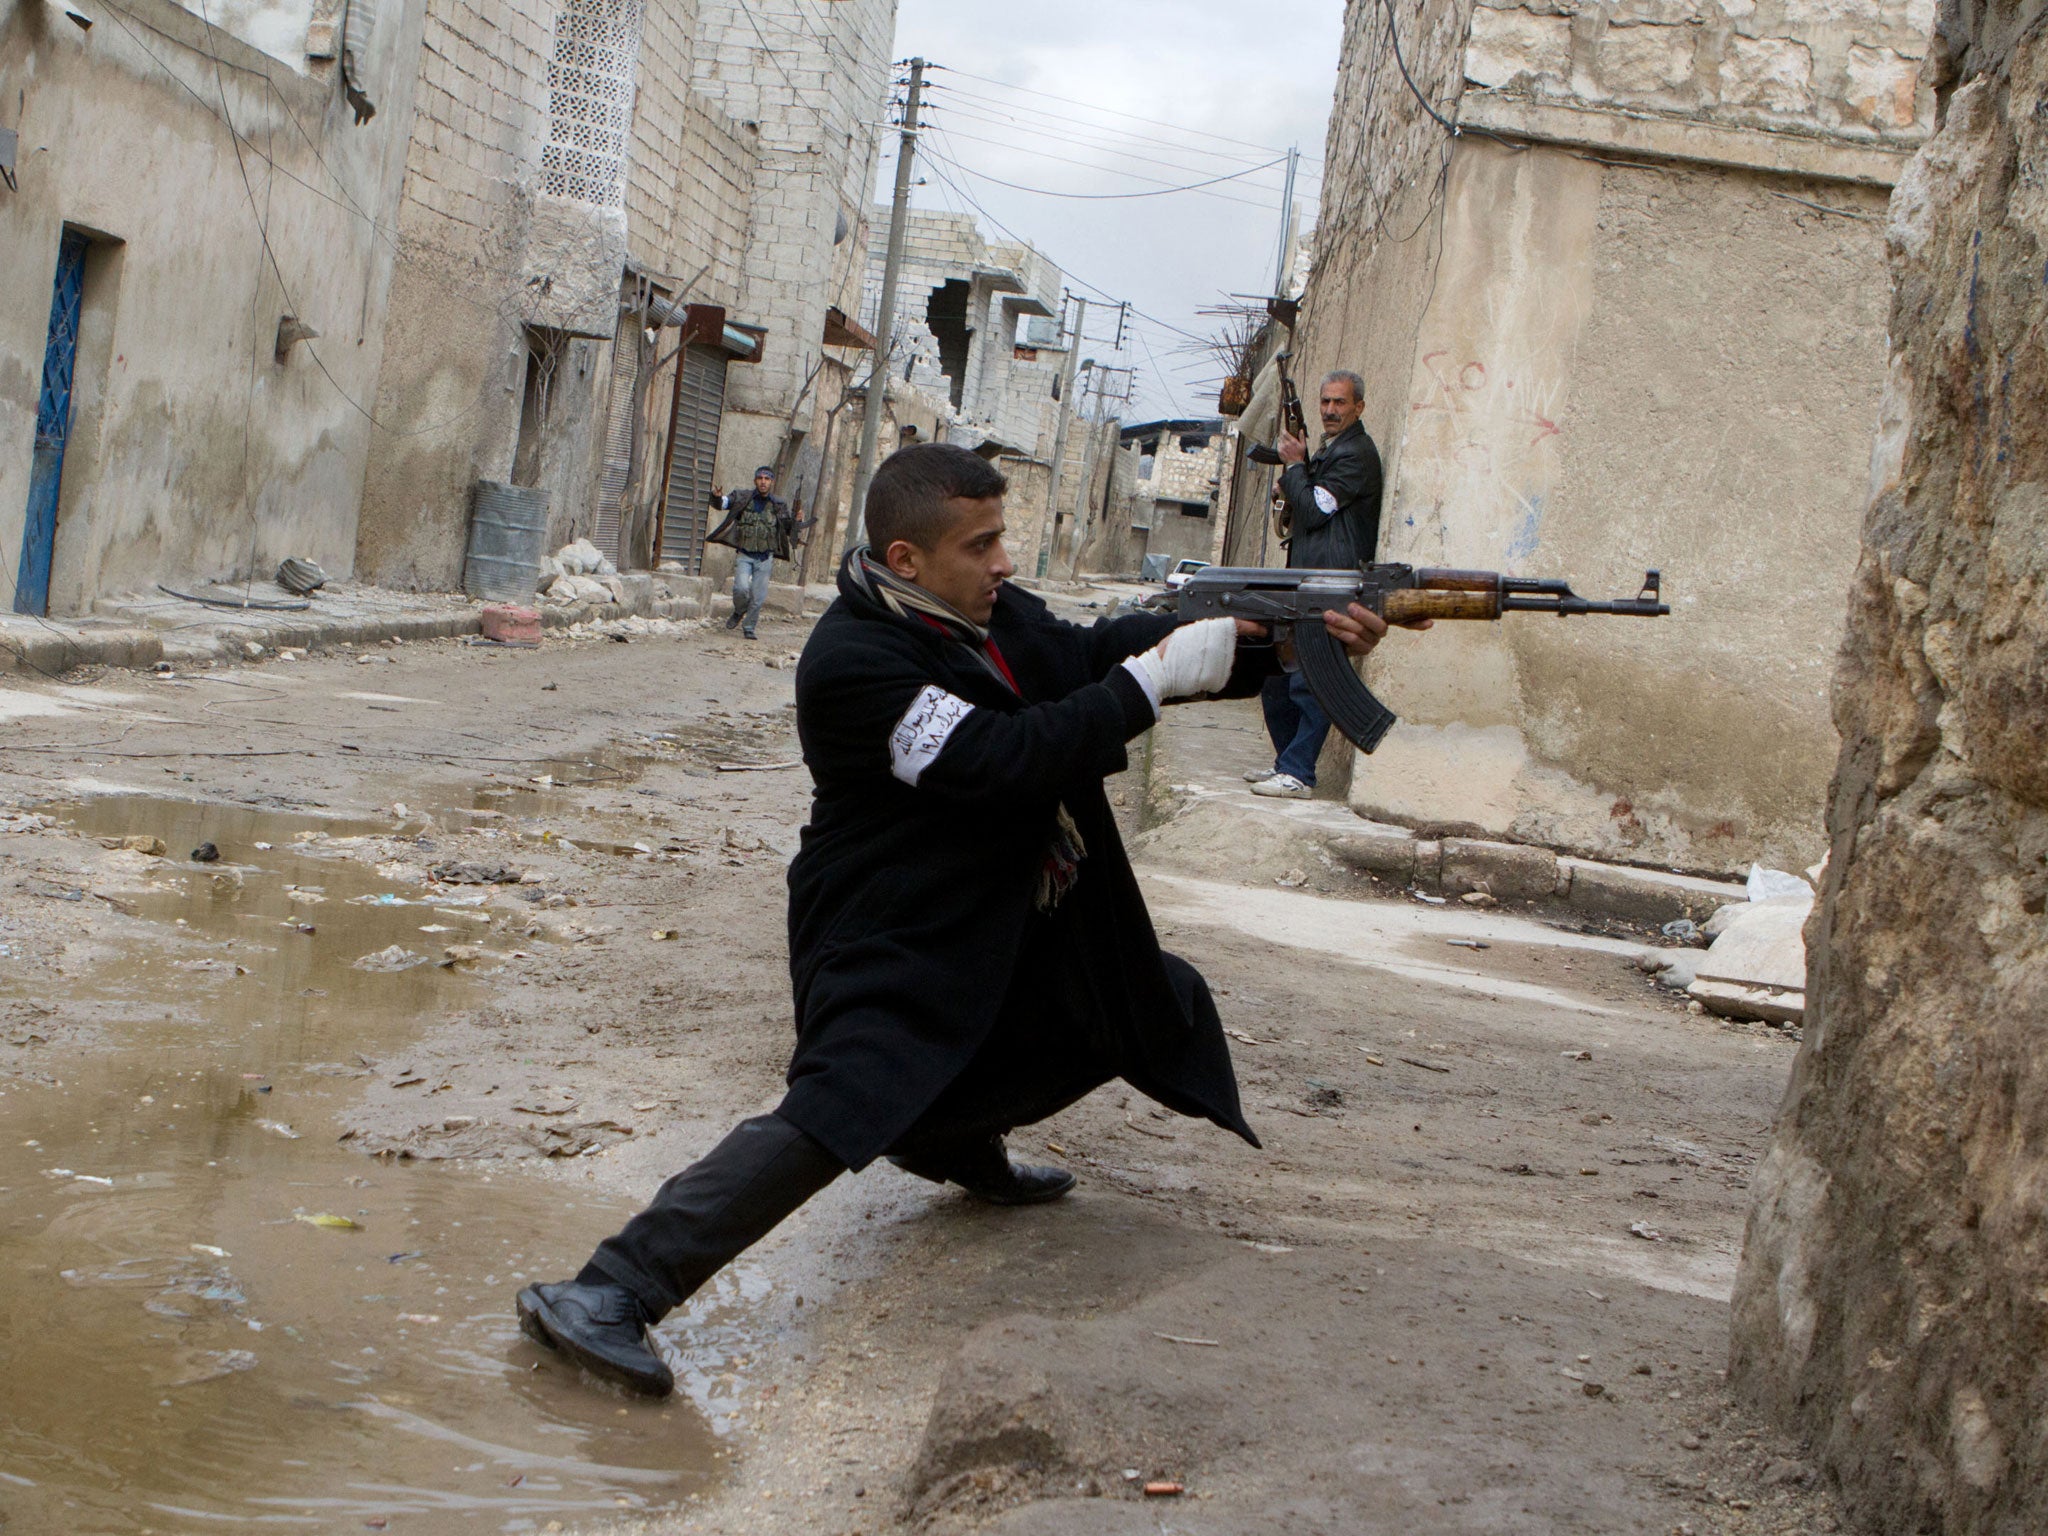 A Syrian rebel aims his weapon during clashes with government forces in the streets near Aleppo international airport in northern Syria on March 4, 2013.